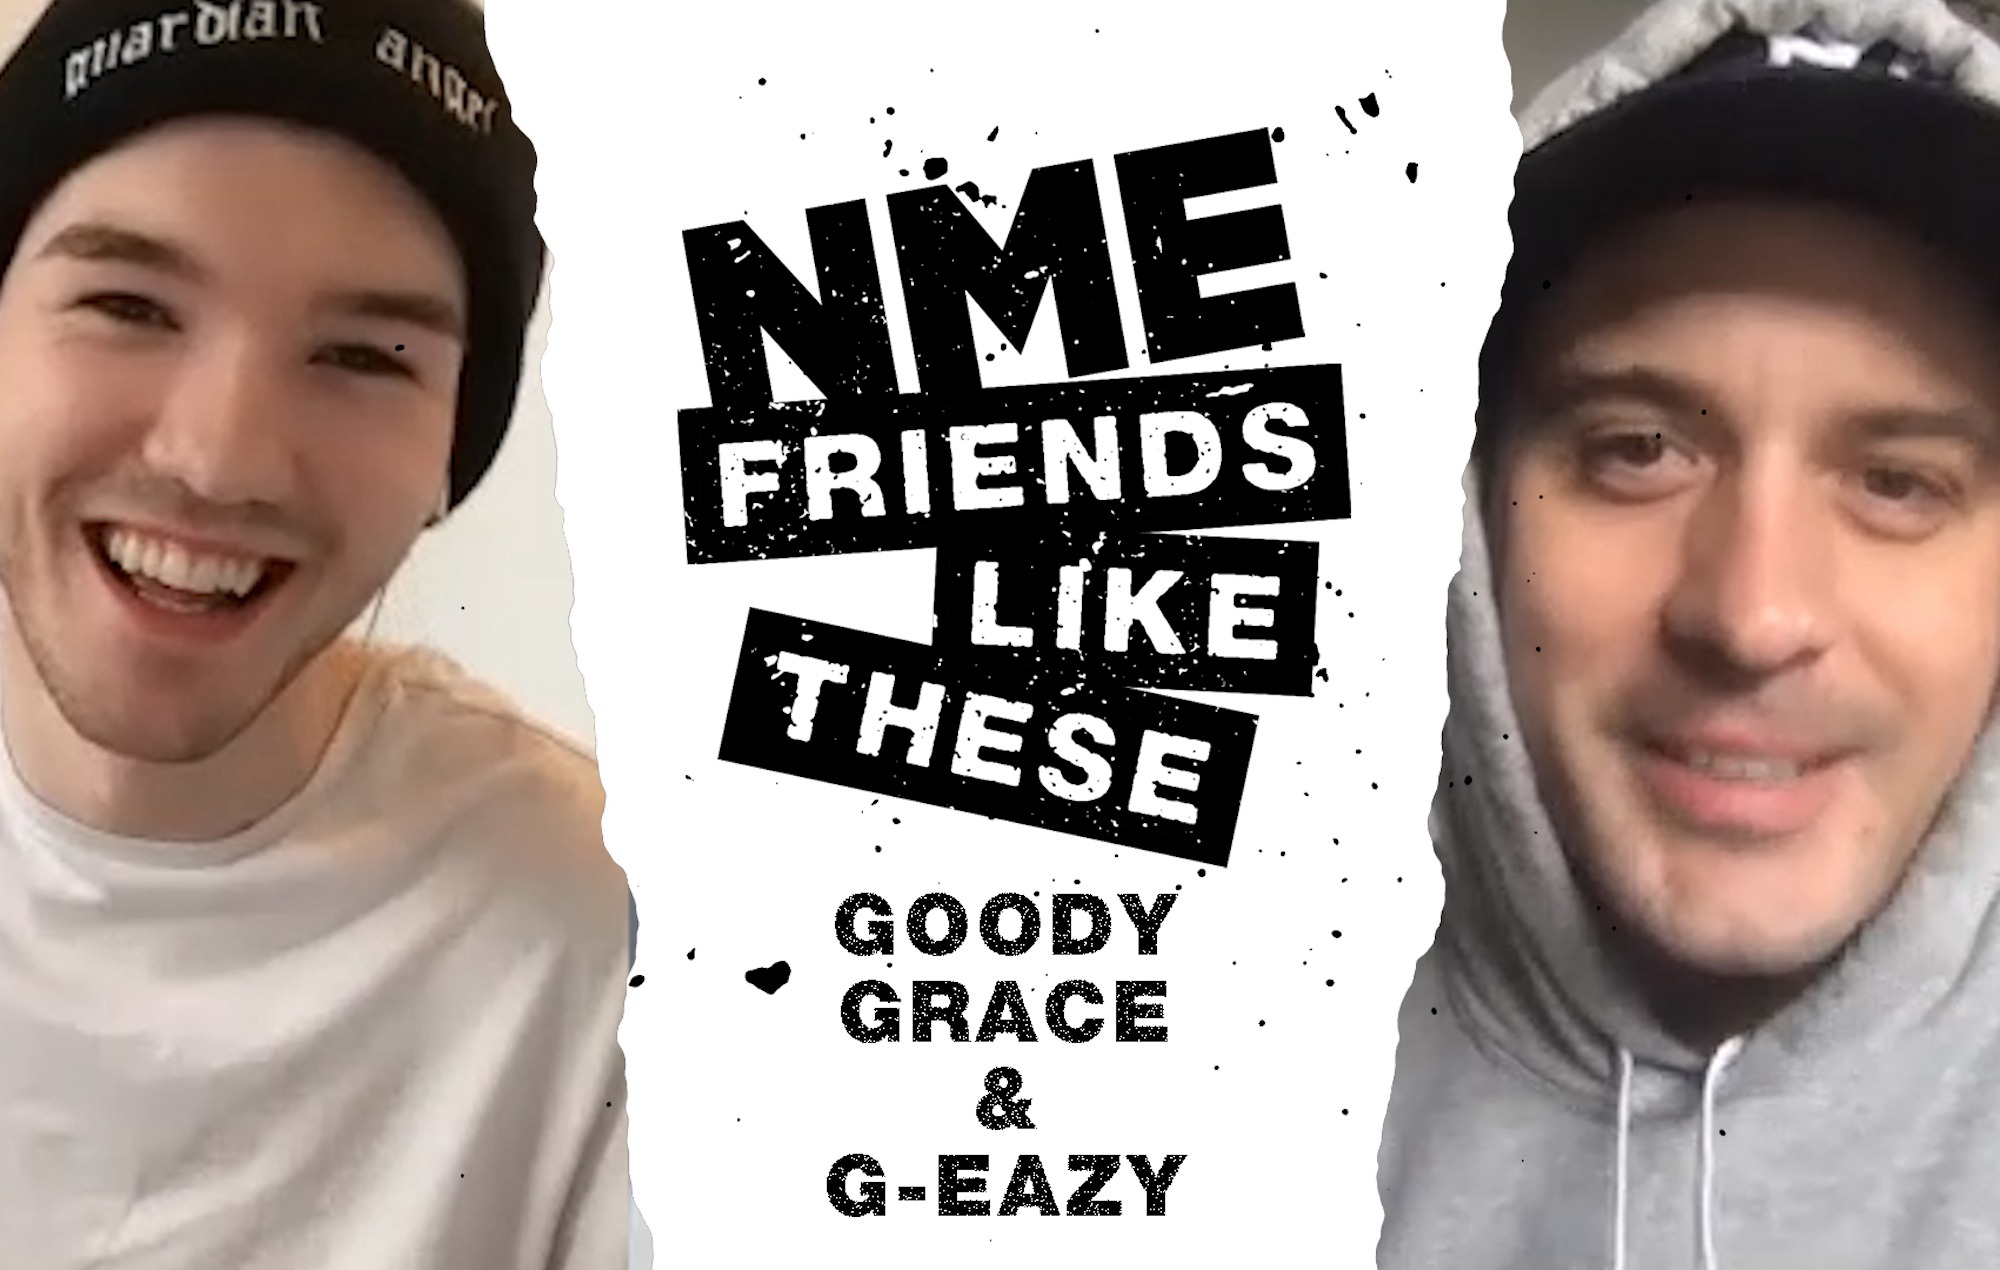 NME Friends Like These: G-Eazy x Goody Grace